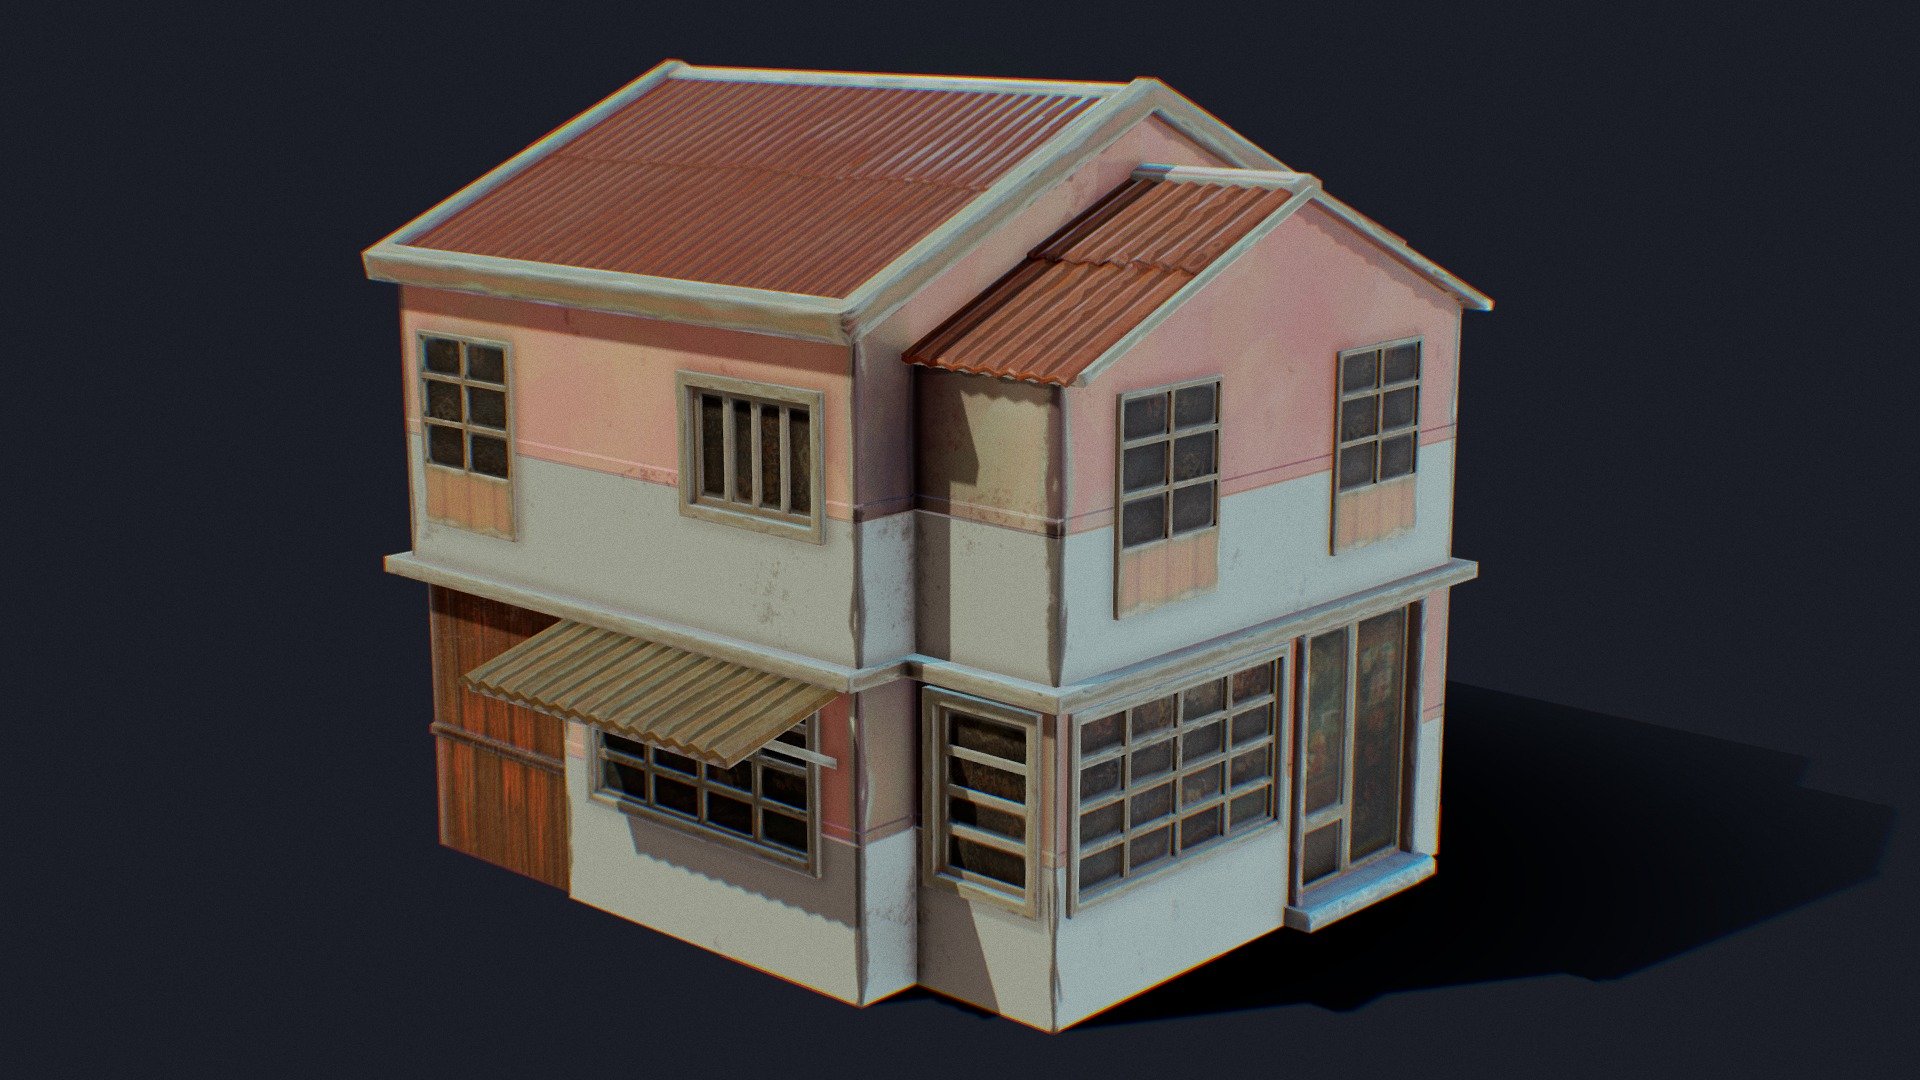 House of Color A Cream,
Which is part of a broad concept, is presented in this package as a painting and model. The concept is generally considered a floating city but it will be anime style as Texture coloring.

Model info, For optimization if you want, you can lower the texture resolution.

Default PBR Textures ( 2048x2048 ) Base Color, Normal, Height , Metallic, Mixed AO, Opacity, Roughness

UNREAL ENGINE 4 ( 2048x2048 ) BaseColor, Normal, OcclusionRoughnessMetallic

Unity 5 ( 2048x2048 ) AlbedoTransparency, Normal, SpecularSmoothness

Poly 1.814 - House of Color A Cream - 3D model by Reberu Games (@ReberuGames) 3d model